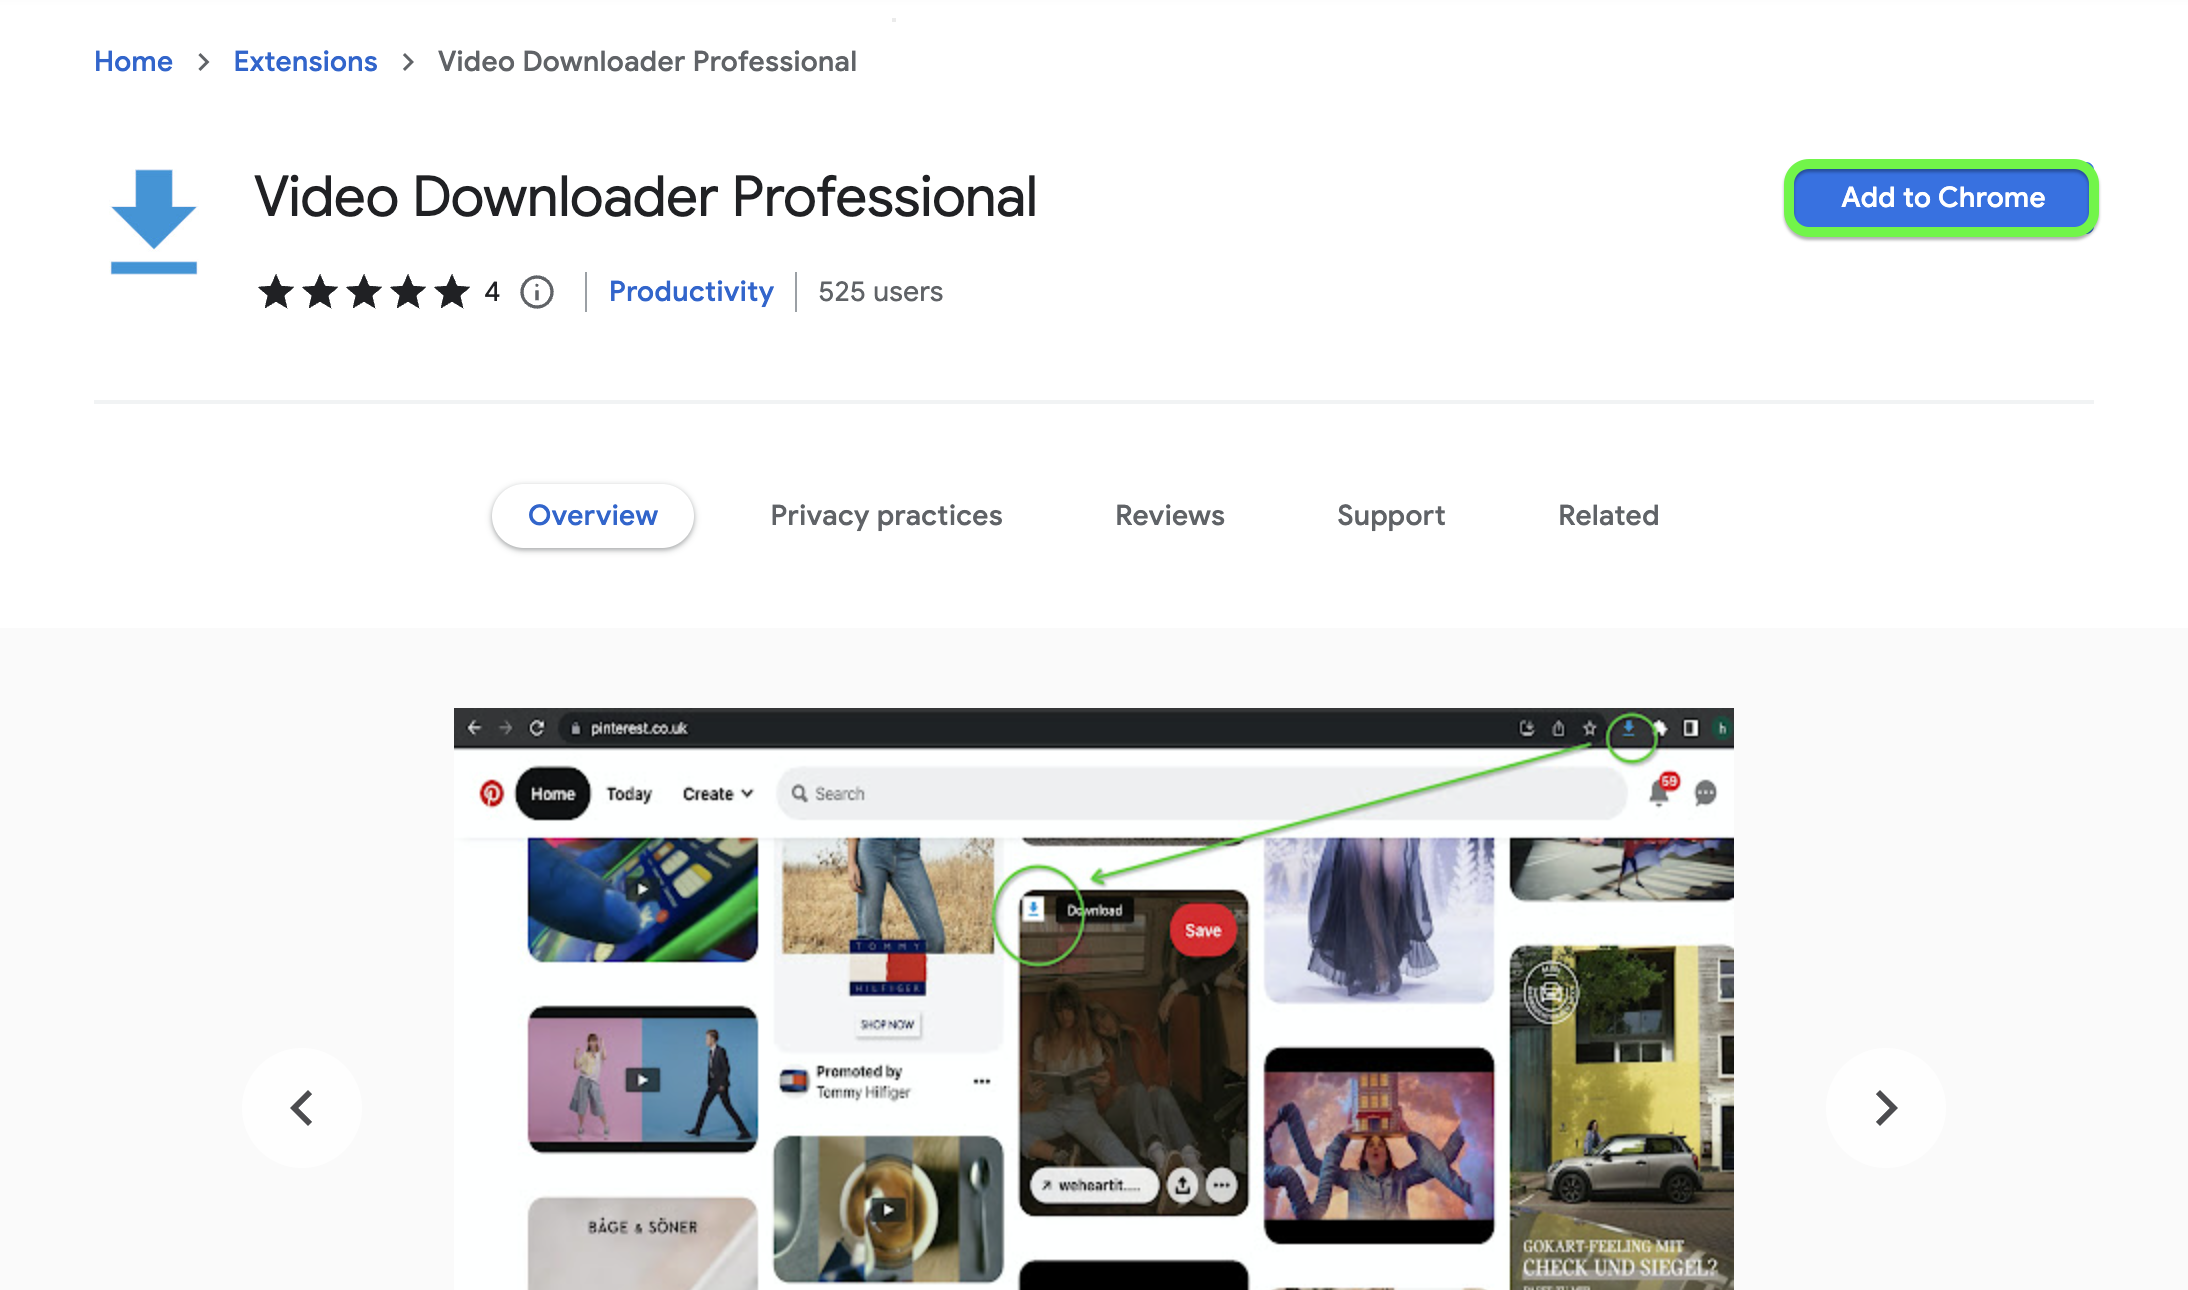 Install Video Downloader Professional into your browser. Click on this extension icon.